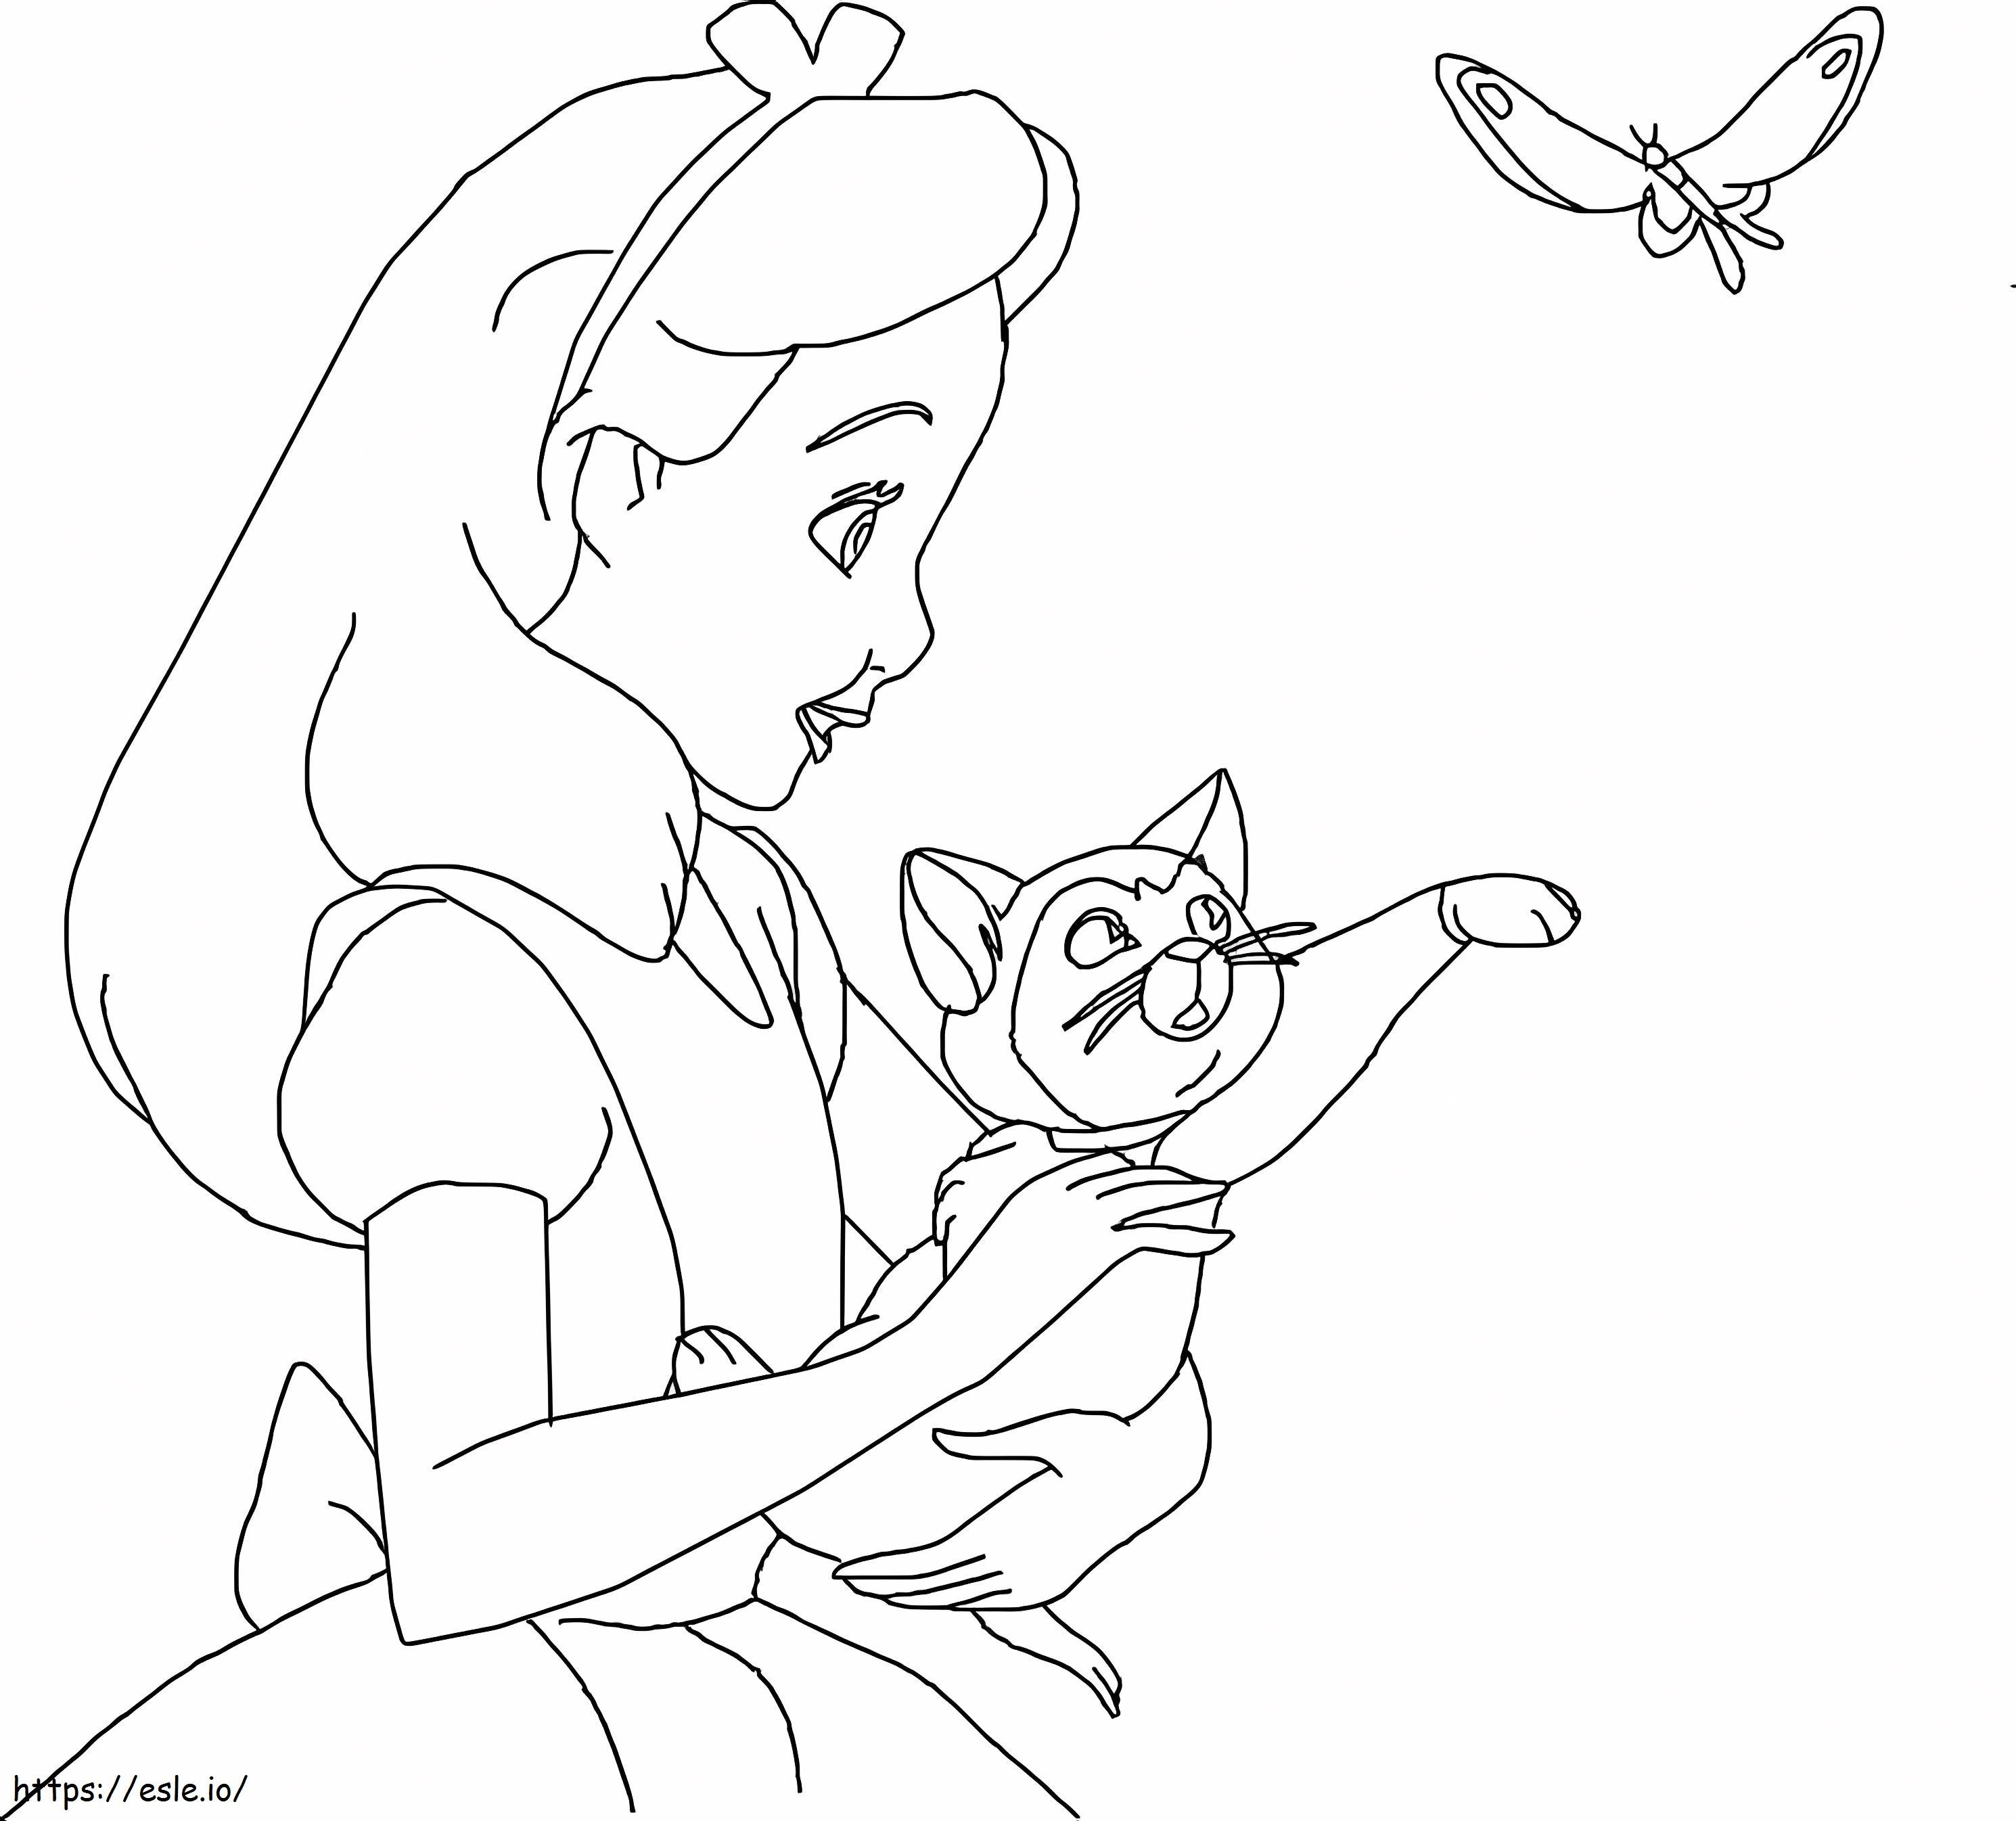 Alice With Kitten coloring page